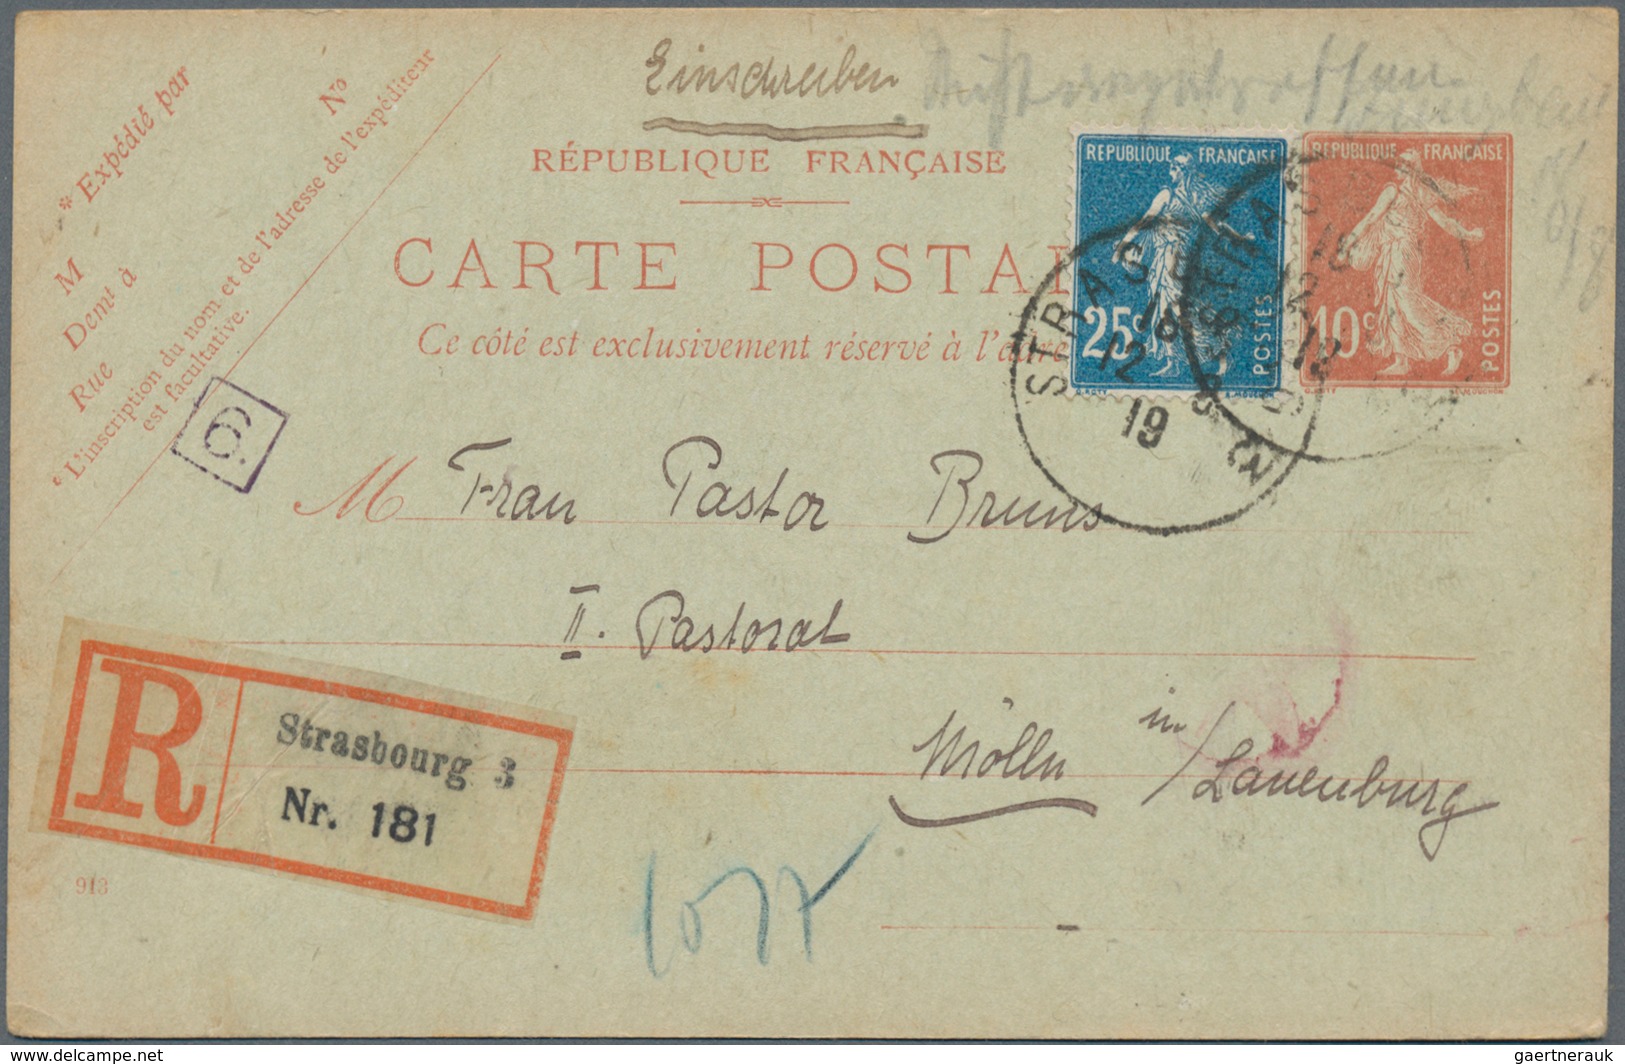 Frankreich: 1860/2010, holding of ca. 450 letters, cards, precursor cards, picture-postcards, intern